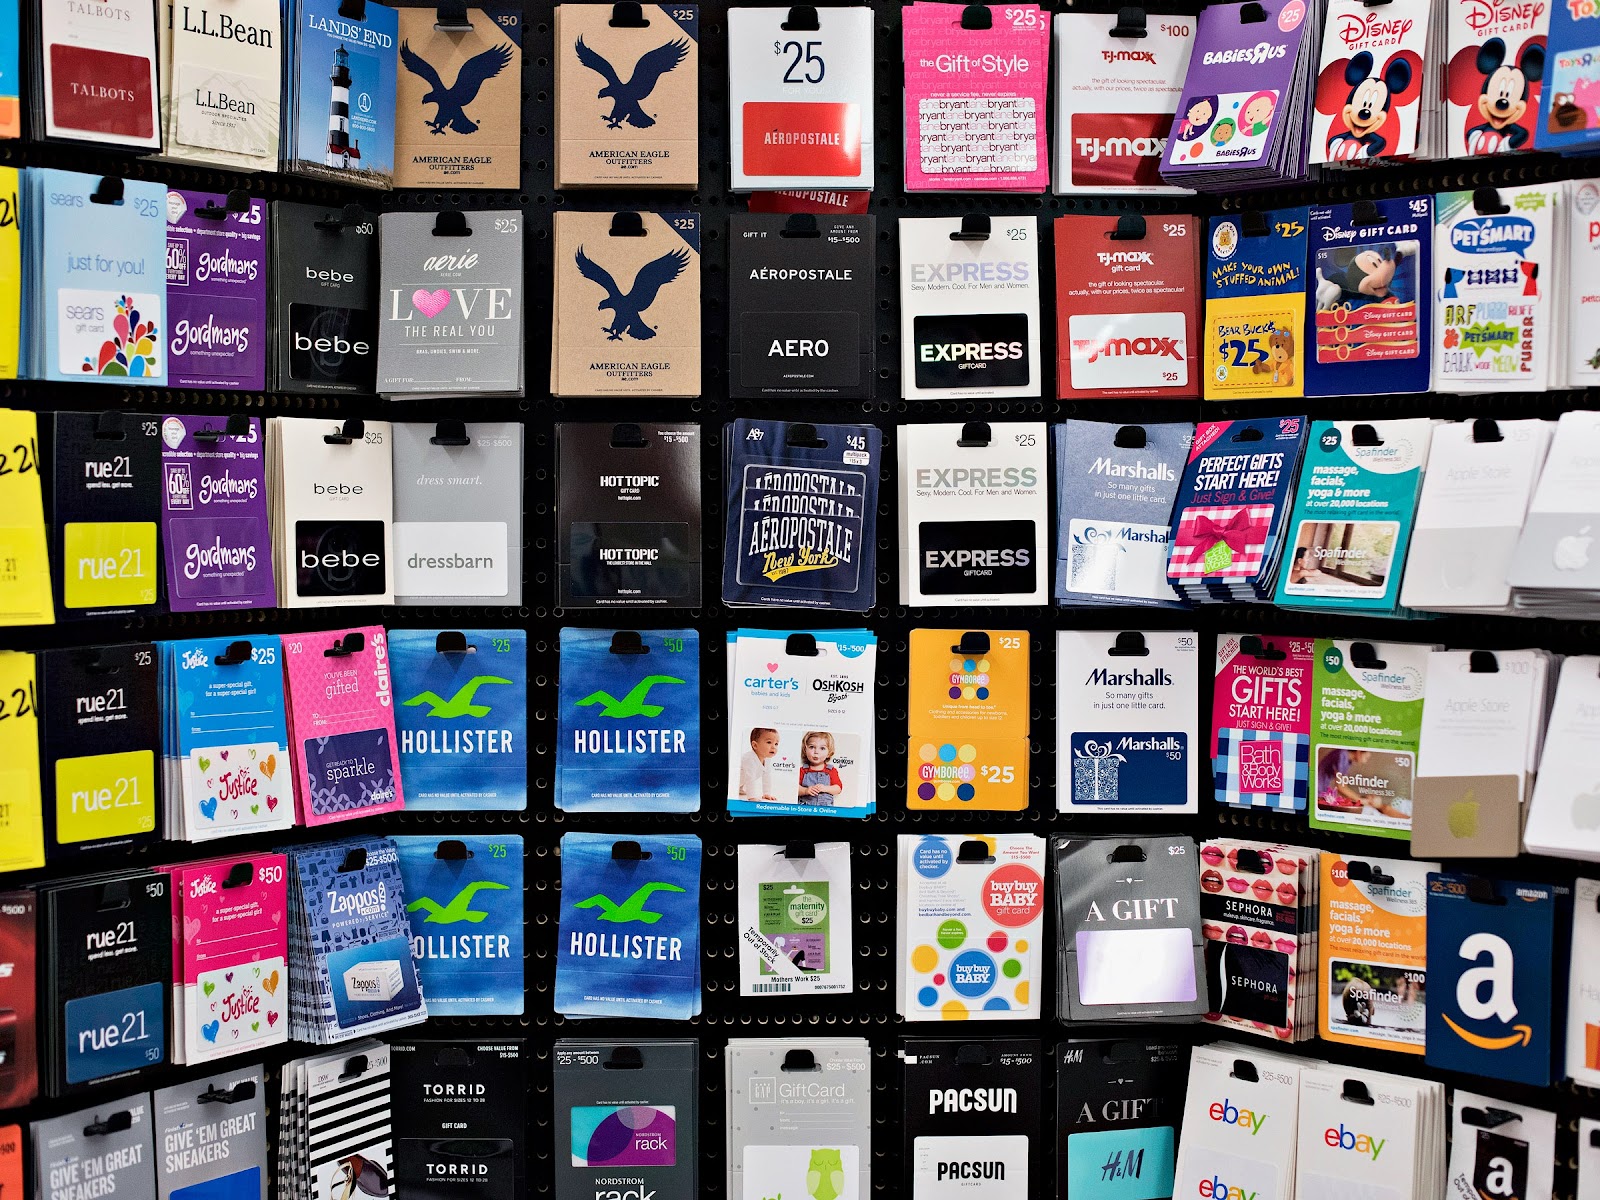 Retail Gift cards for those who forgot about Mother's Day